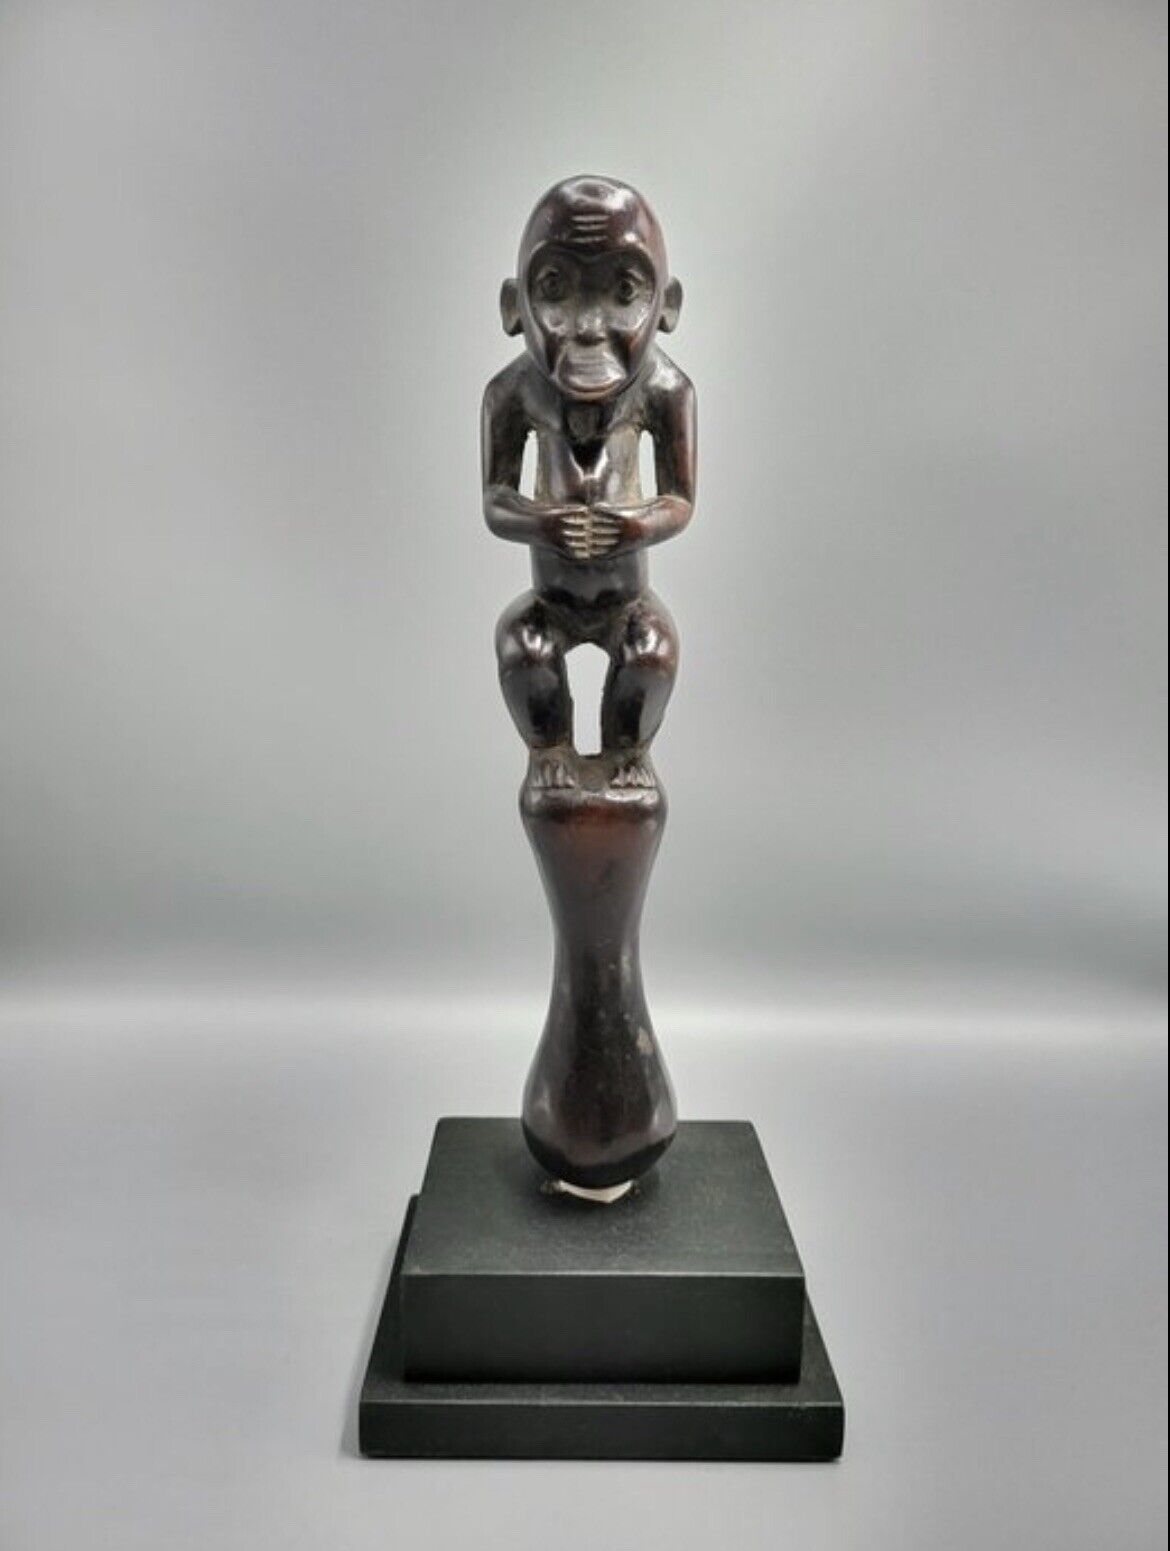 Singe - Cameroon African Monkey Motherhood Wood Carving 11.8 Inches Tall